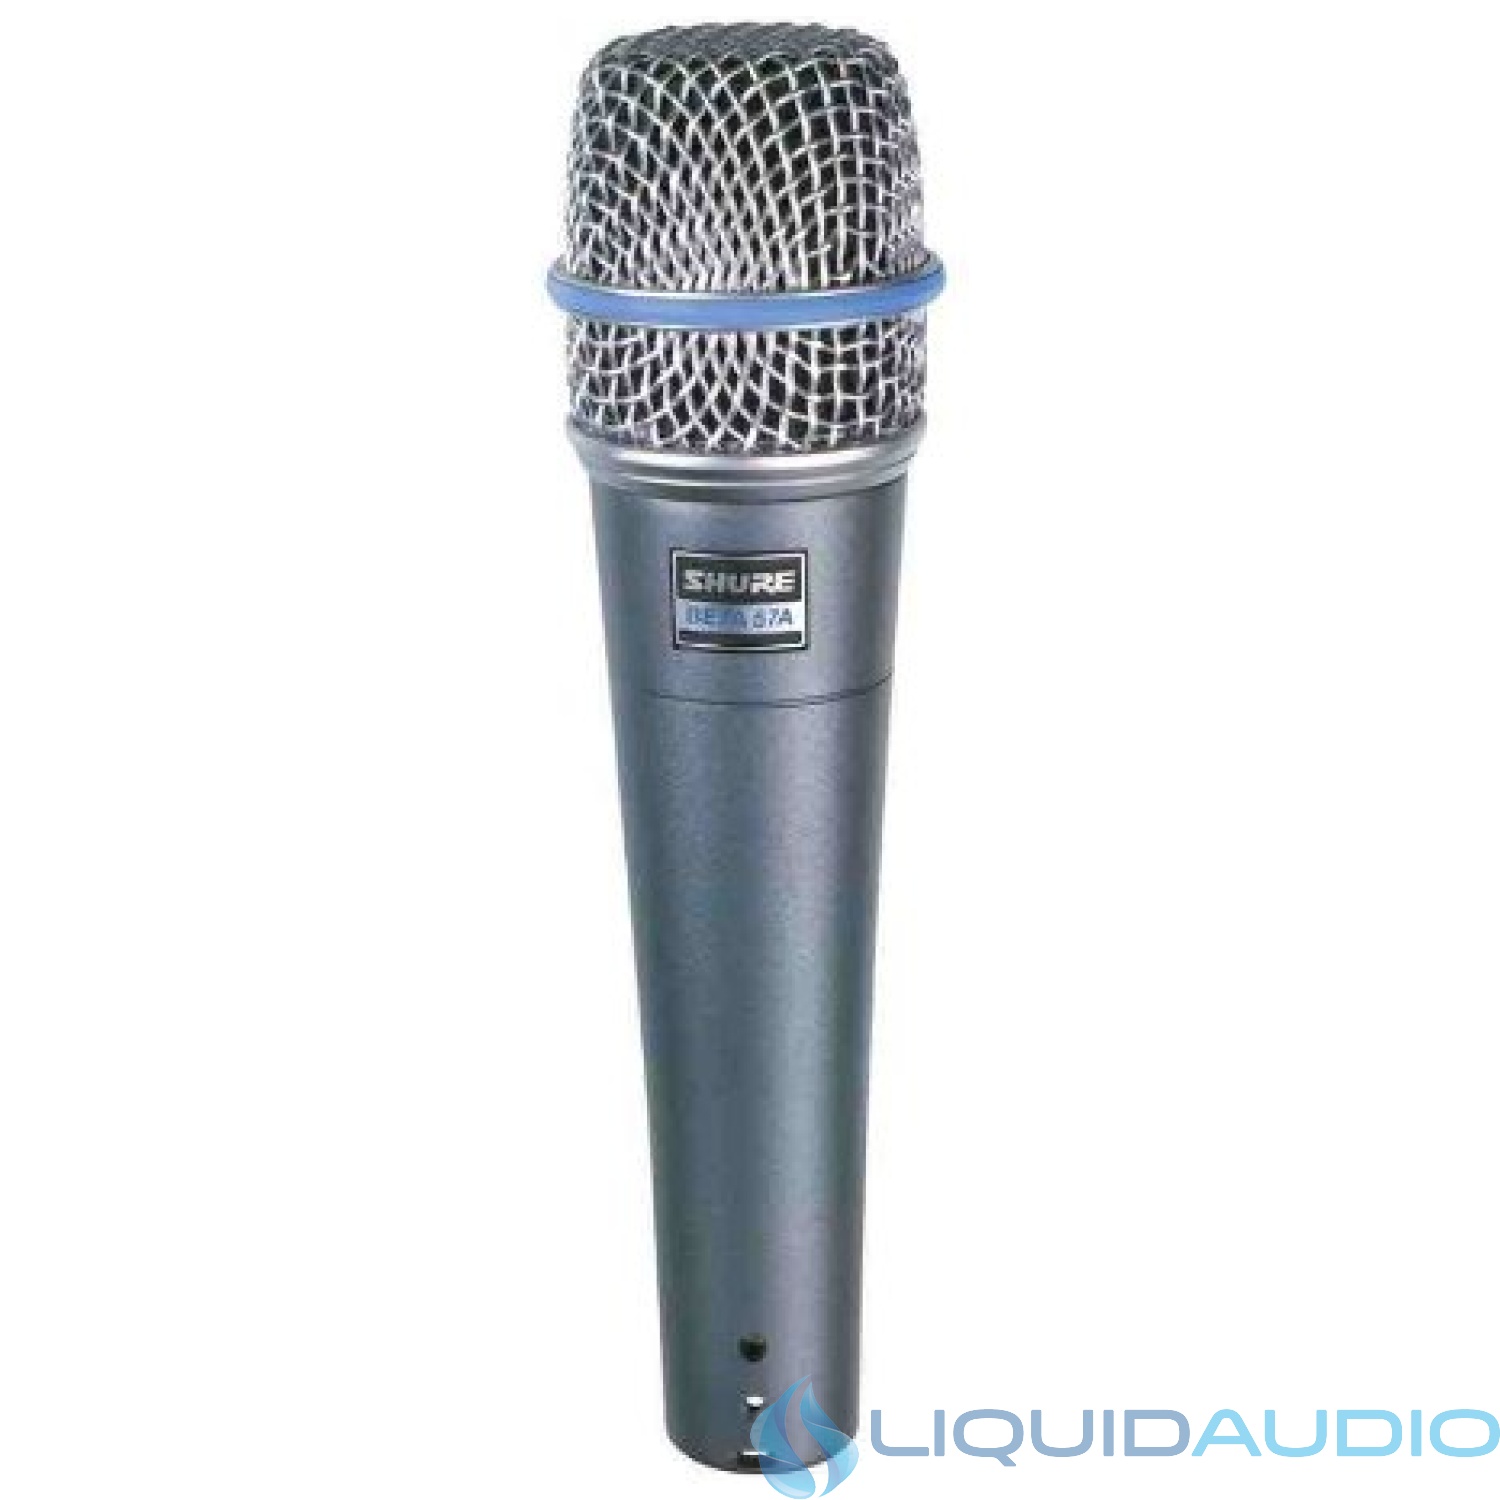 Shure BETA 57A Supercardioid Dynamic Microhone with High Output Neodymium Element for Vocal/Instrument Applications